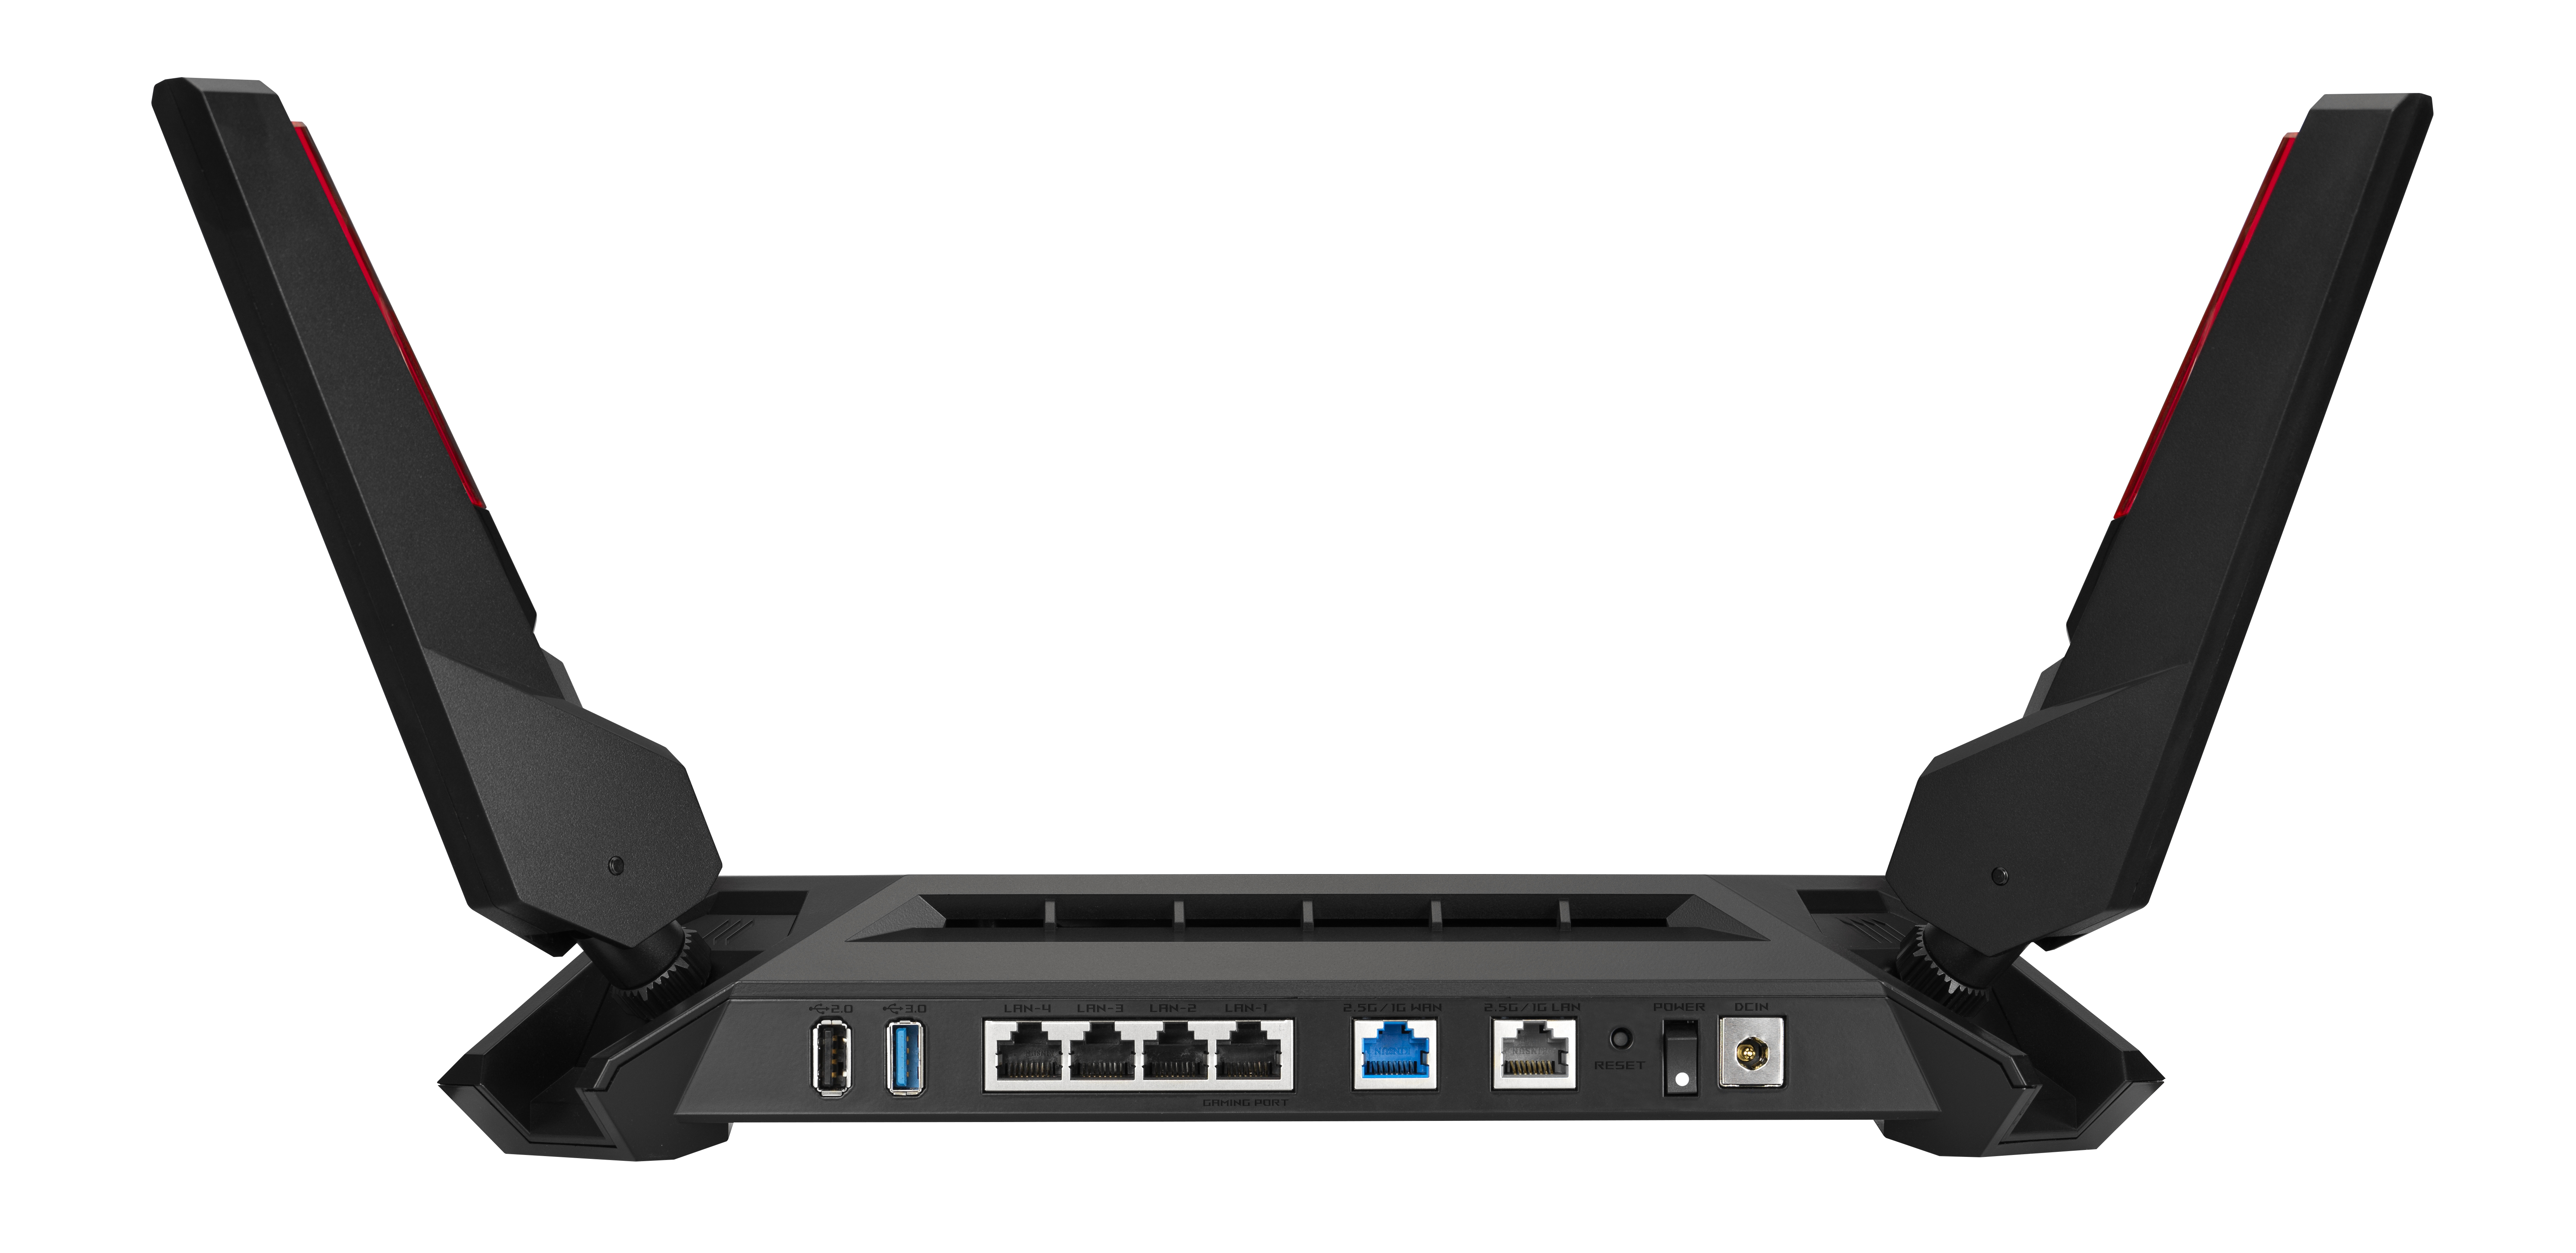 64 Device 4G LTE Router 5ghz With Dual Band Gigabit Ethernet LAN